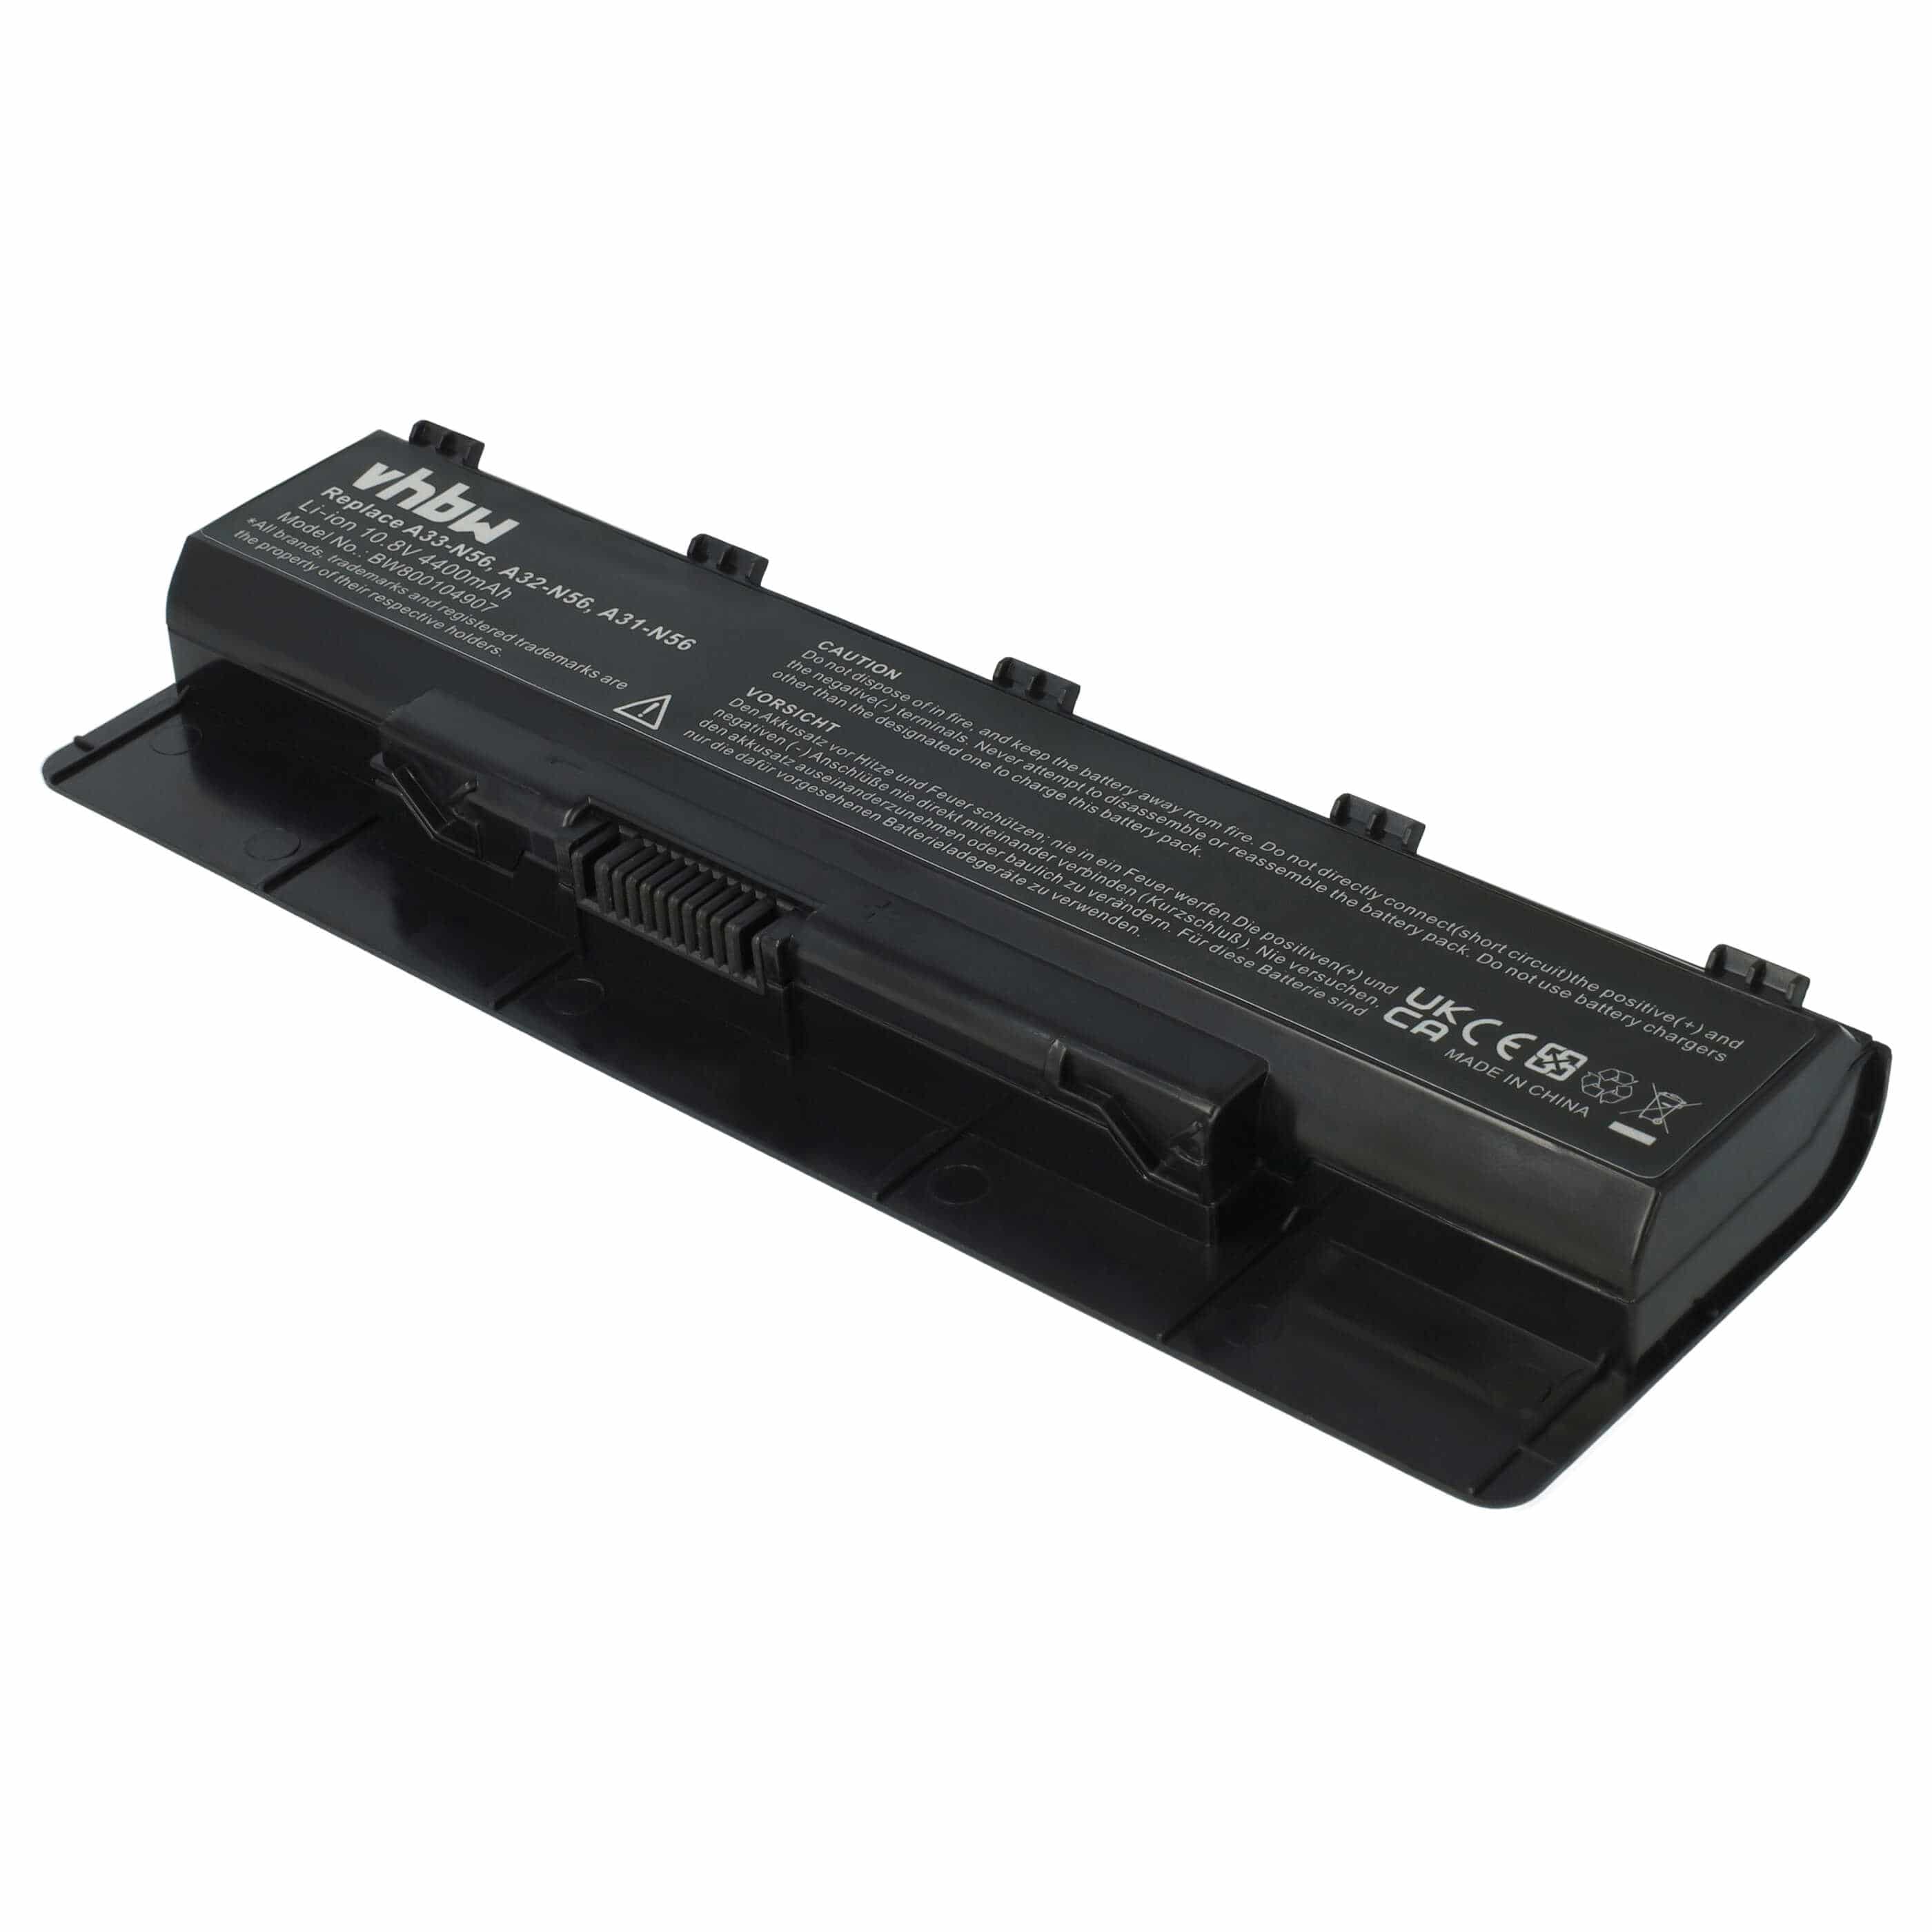 Notebook Battery Replacement for Asus A32-N56, A31-N56, A33-N56 - 4400mAh 10.8V Li-Ion, black